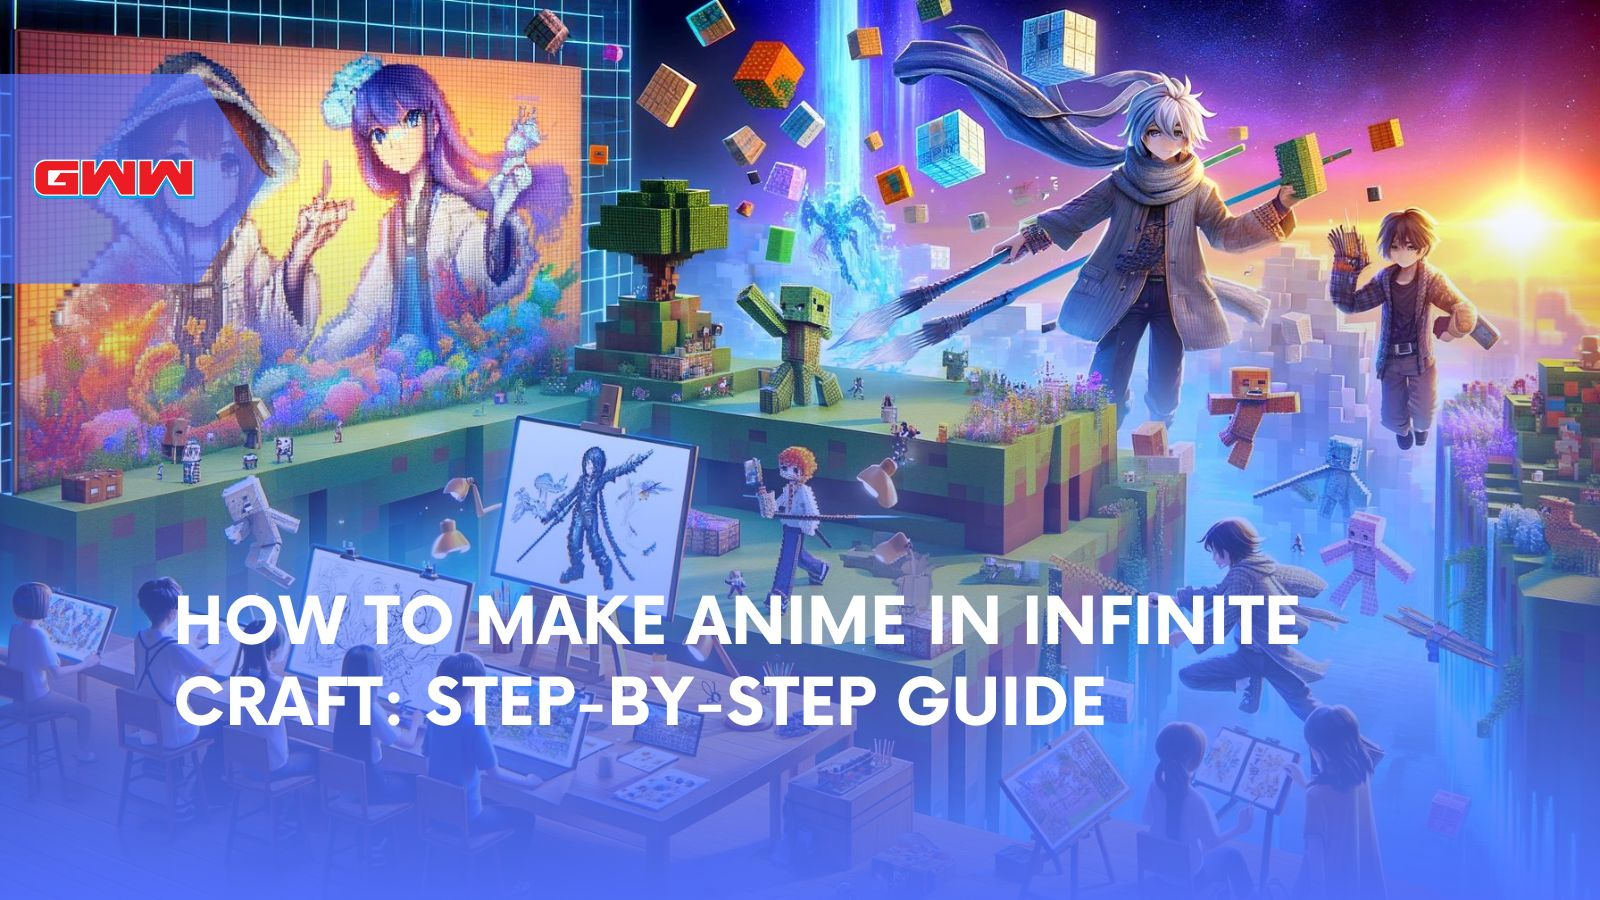 How to Make Anime in Infinite Craft: Step-by-Step Guide.